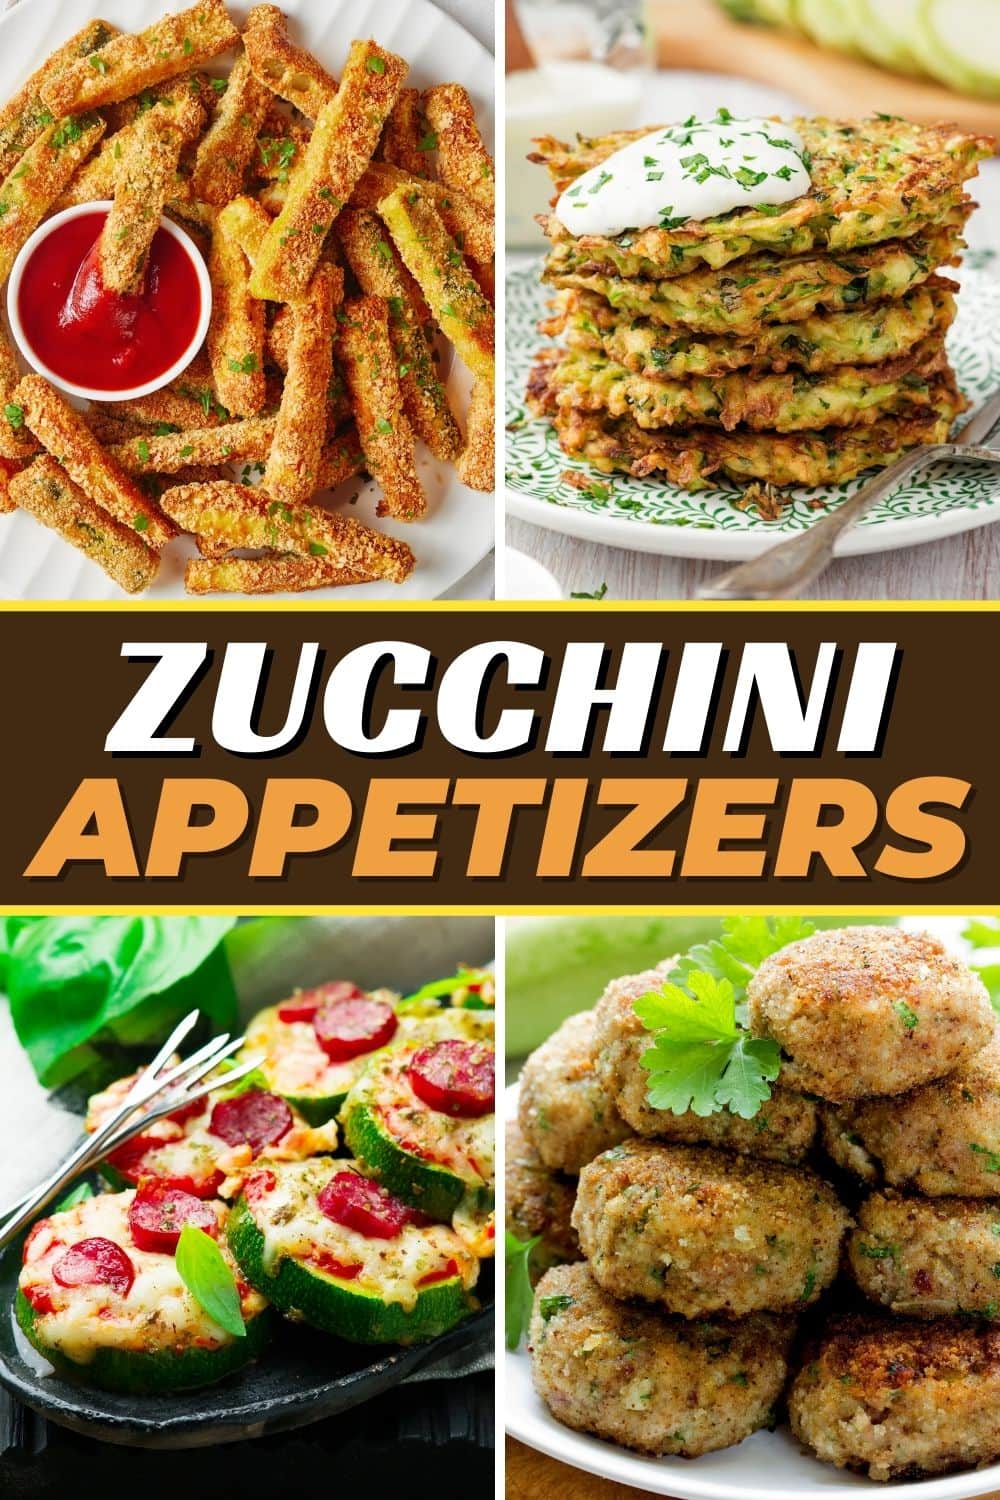 17 Healthy Zucchini Appetizers - Insanely Good